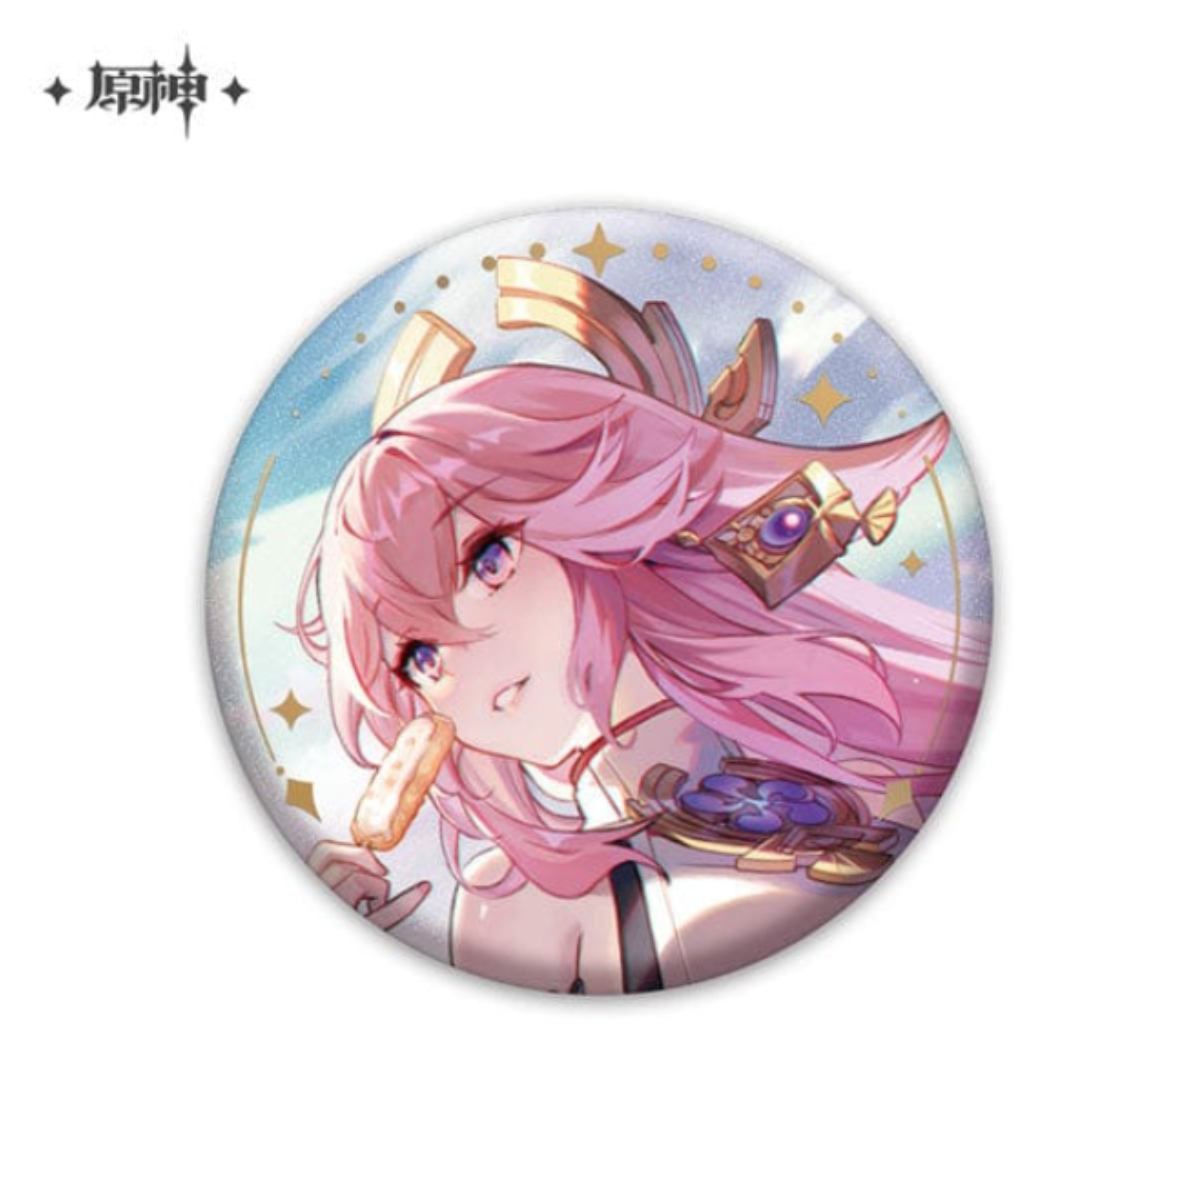 miHoYo Genshin Impact Anecdote Series Characters Badge-Miko-miHoYo-Ace Cards &amp; Collectibles